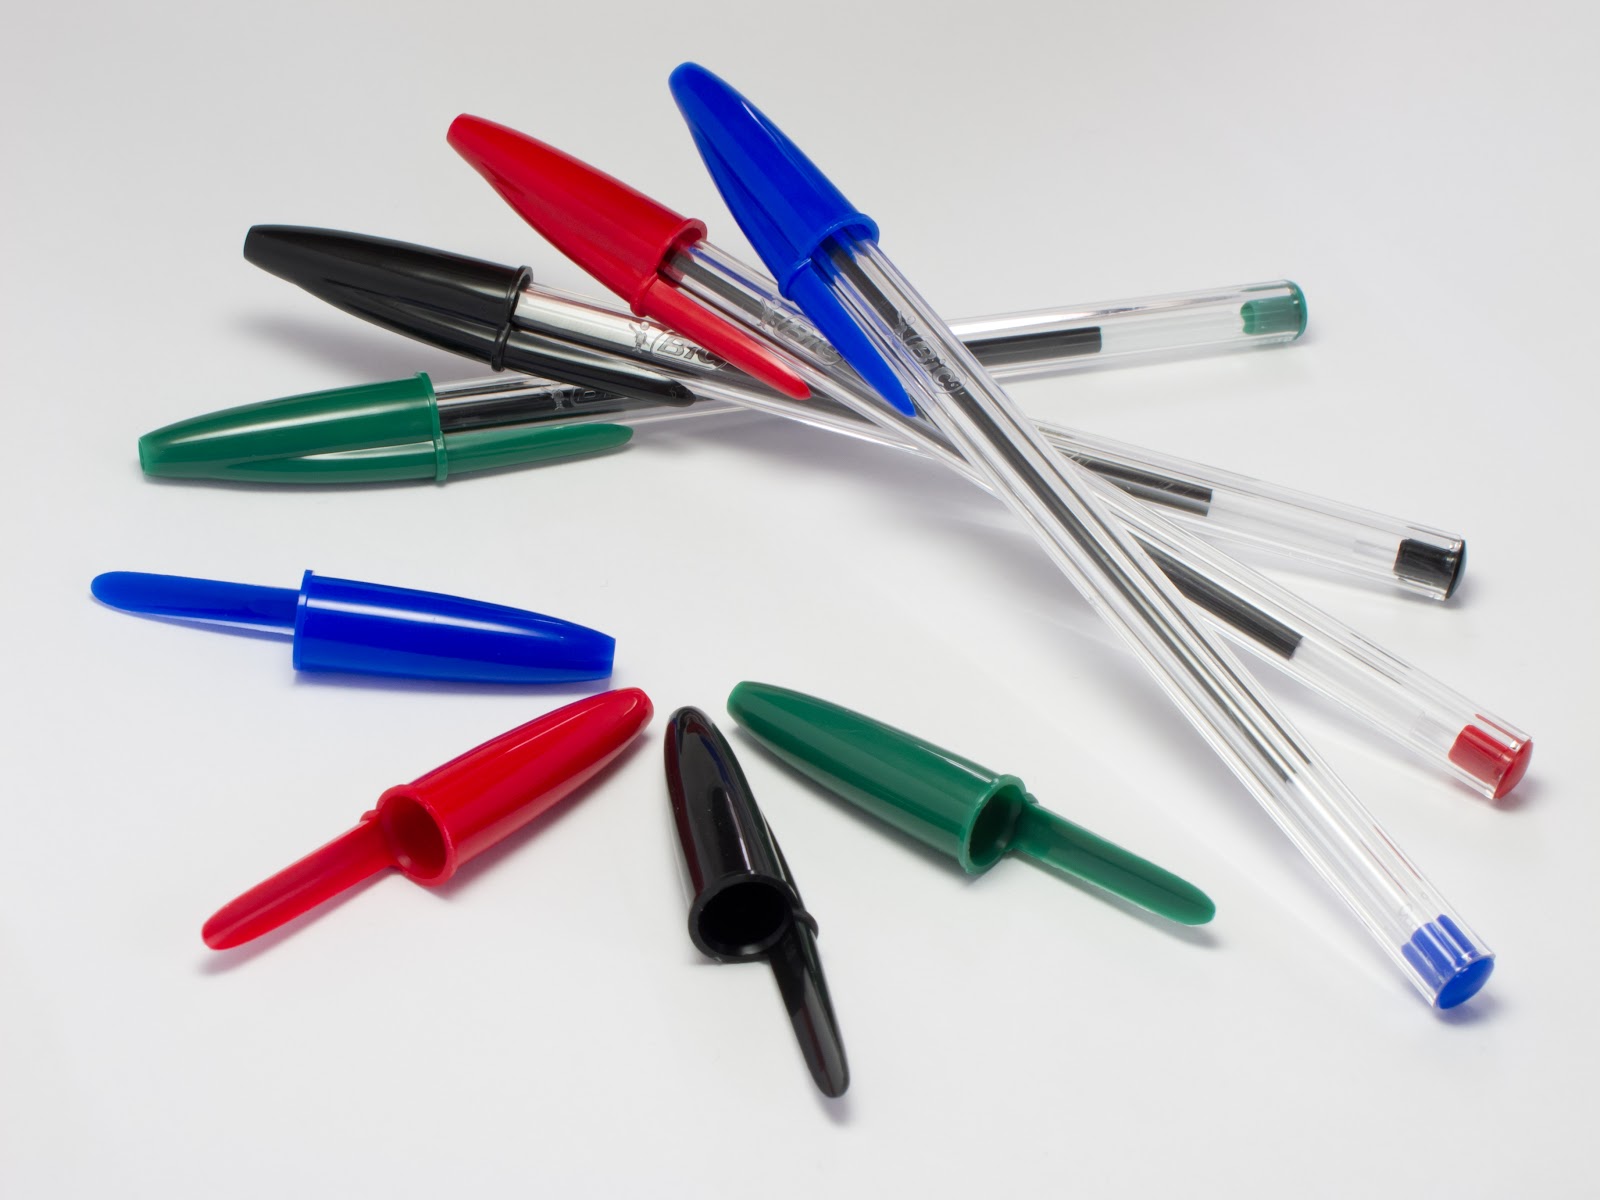 File:4 Bic Cristal pens and caps.jpg - Wikimedia Commons